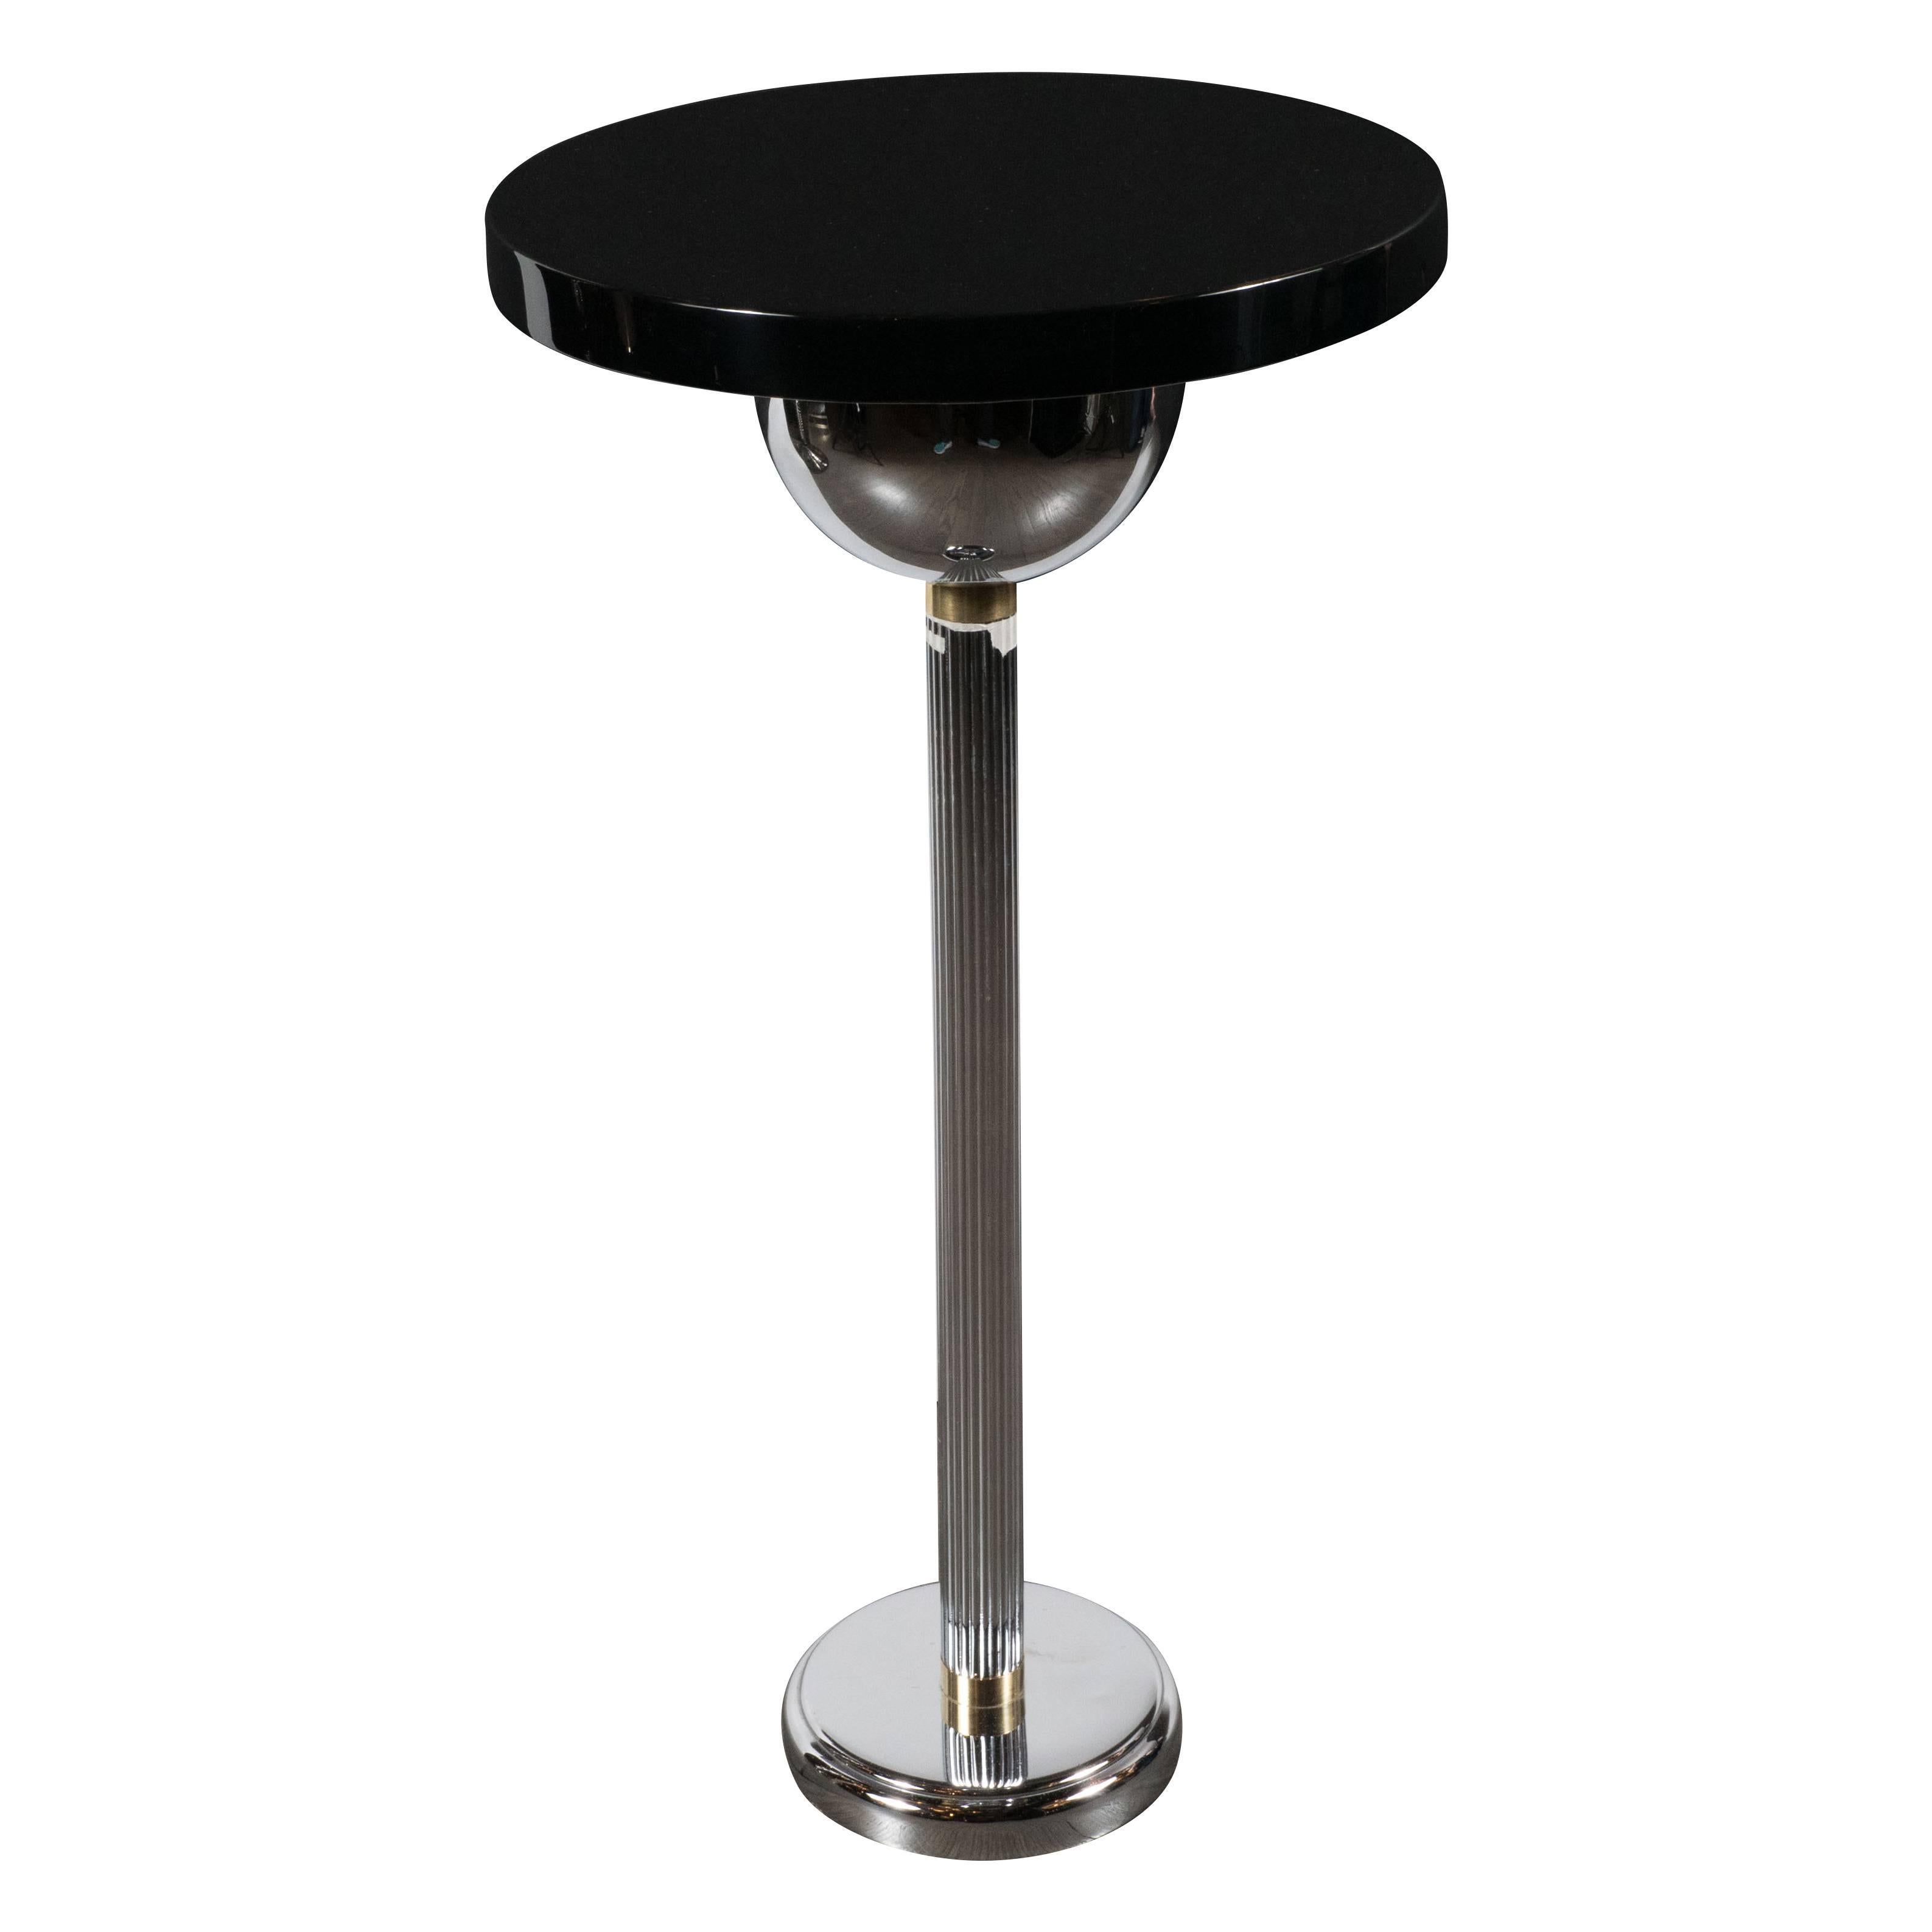 Art Deco Machine Age Drinks Table in Black Lacquer and Chrome